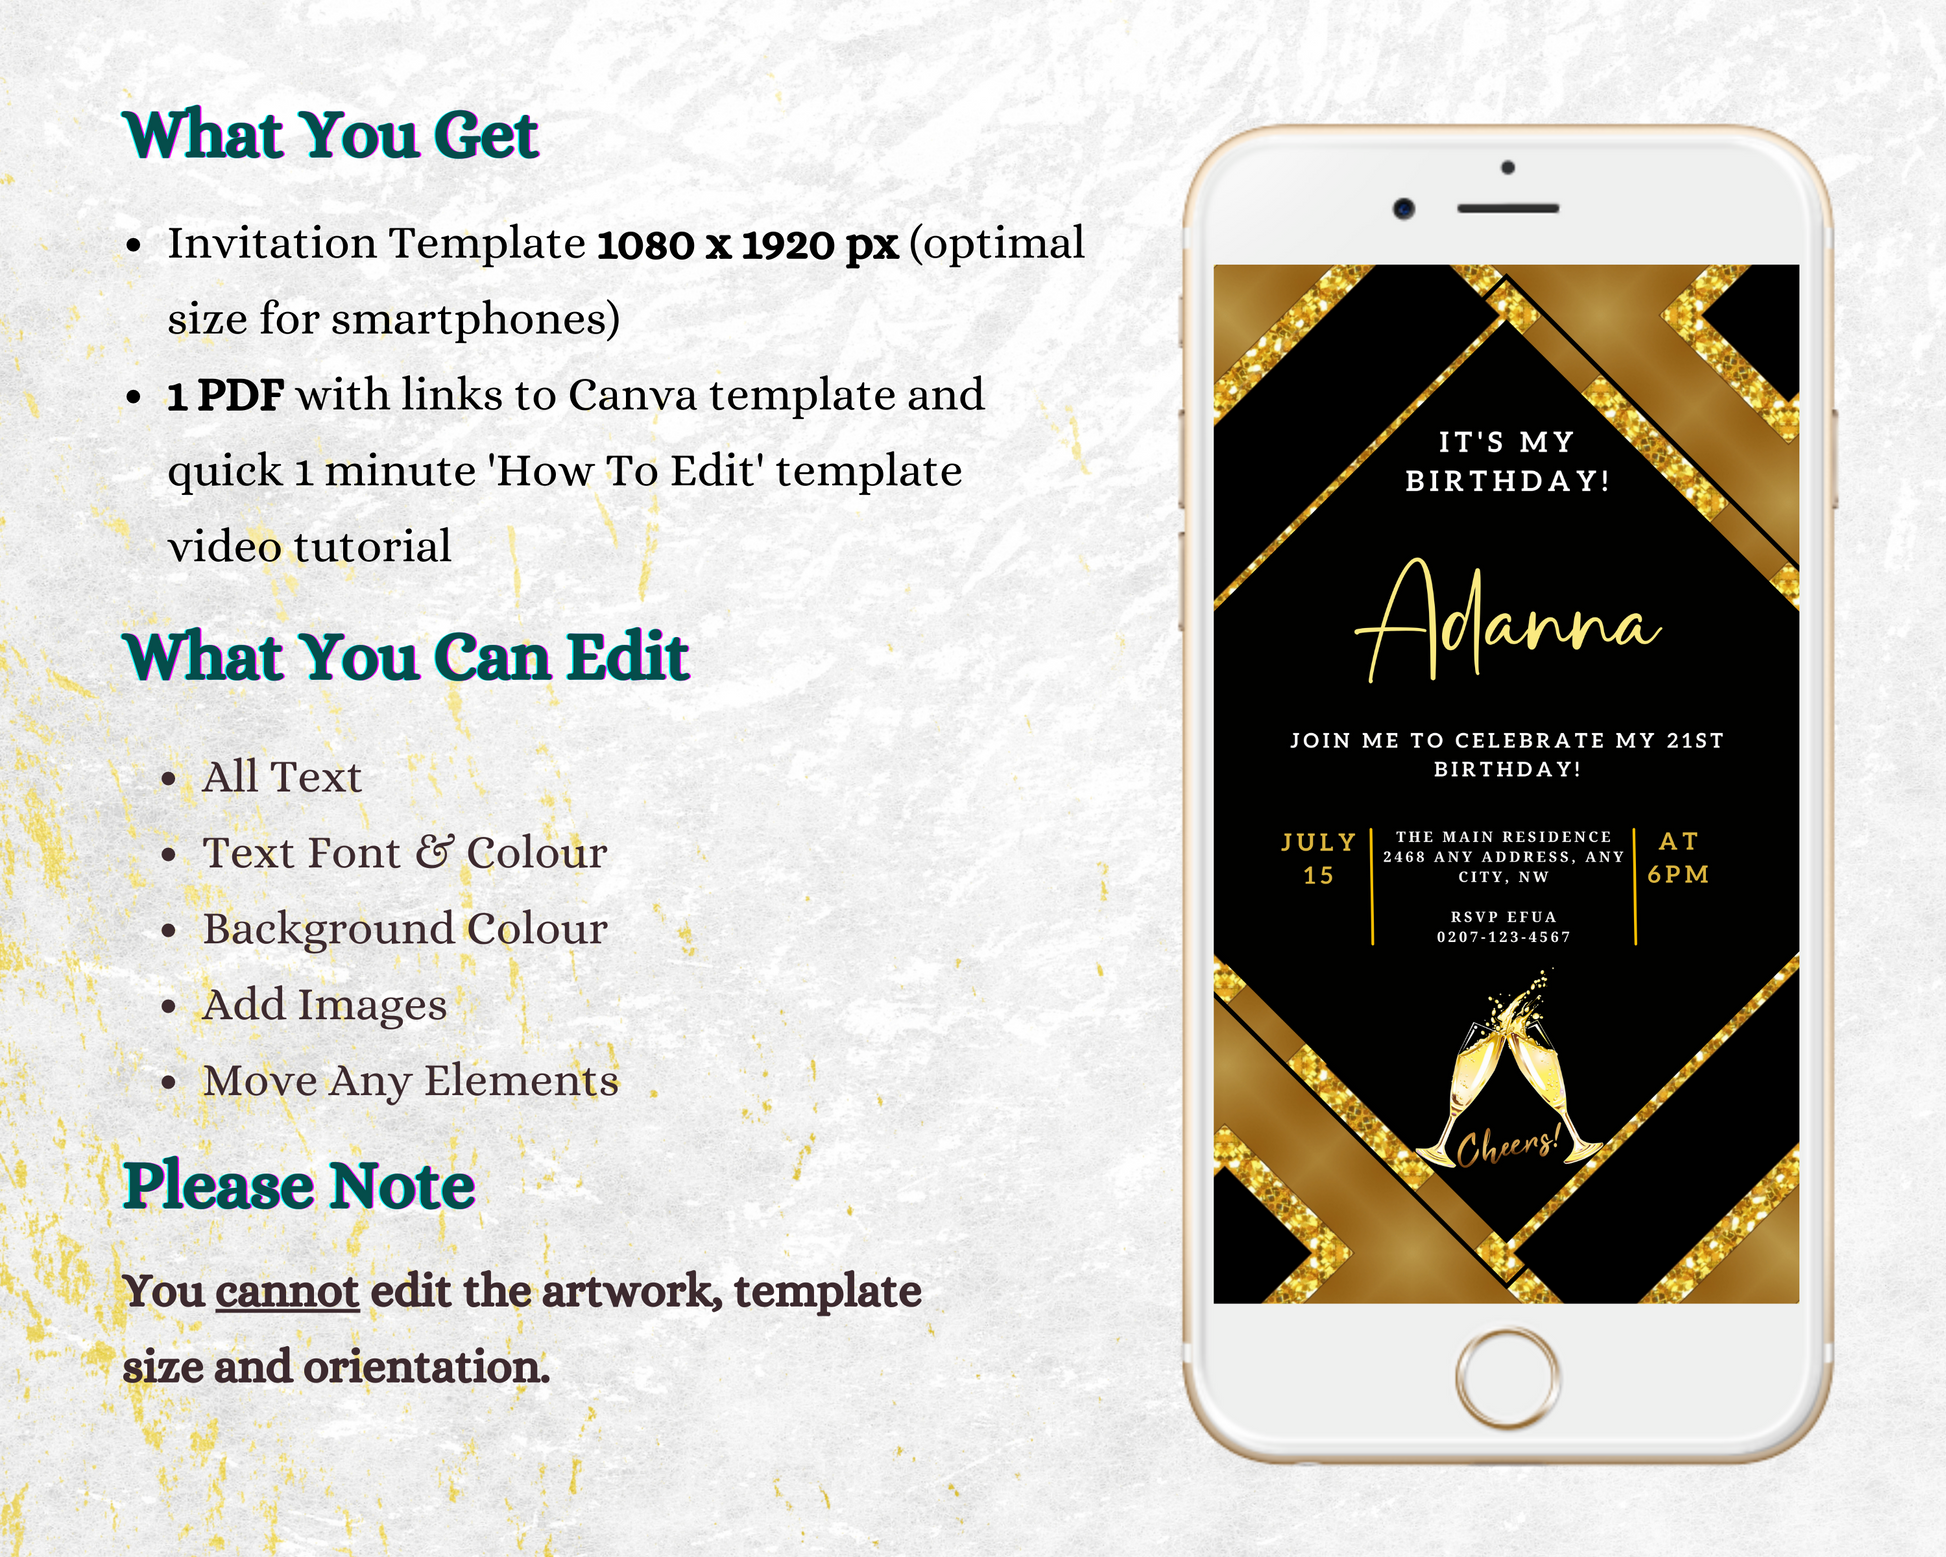 Gold and black glitter champagne-themed editable party evite, customizable via Canva for digital invitations, includes champagne glasses and elegant design elements.